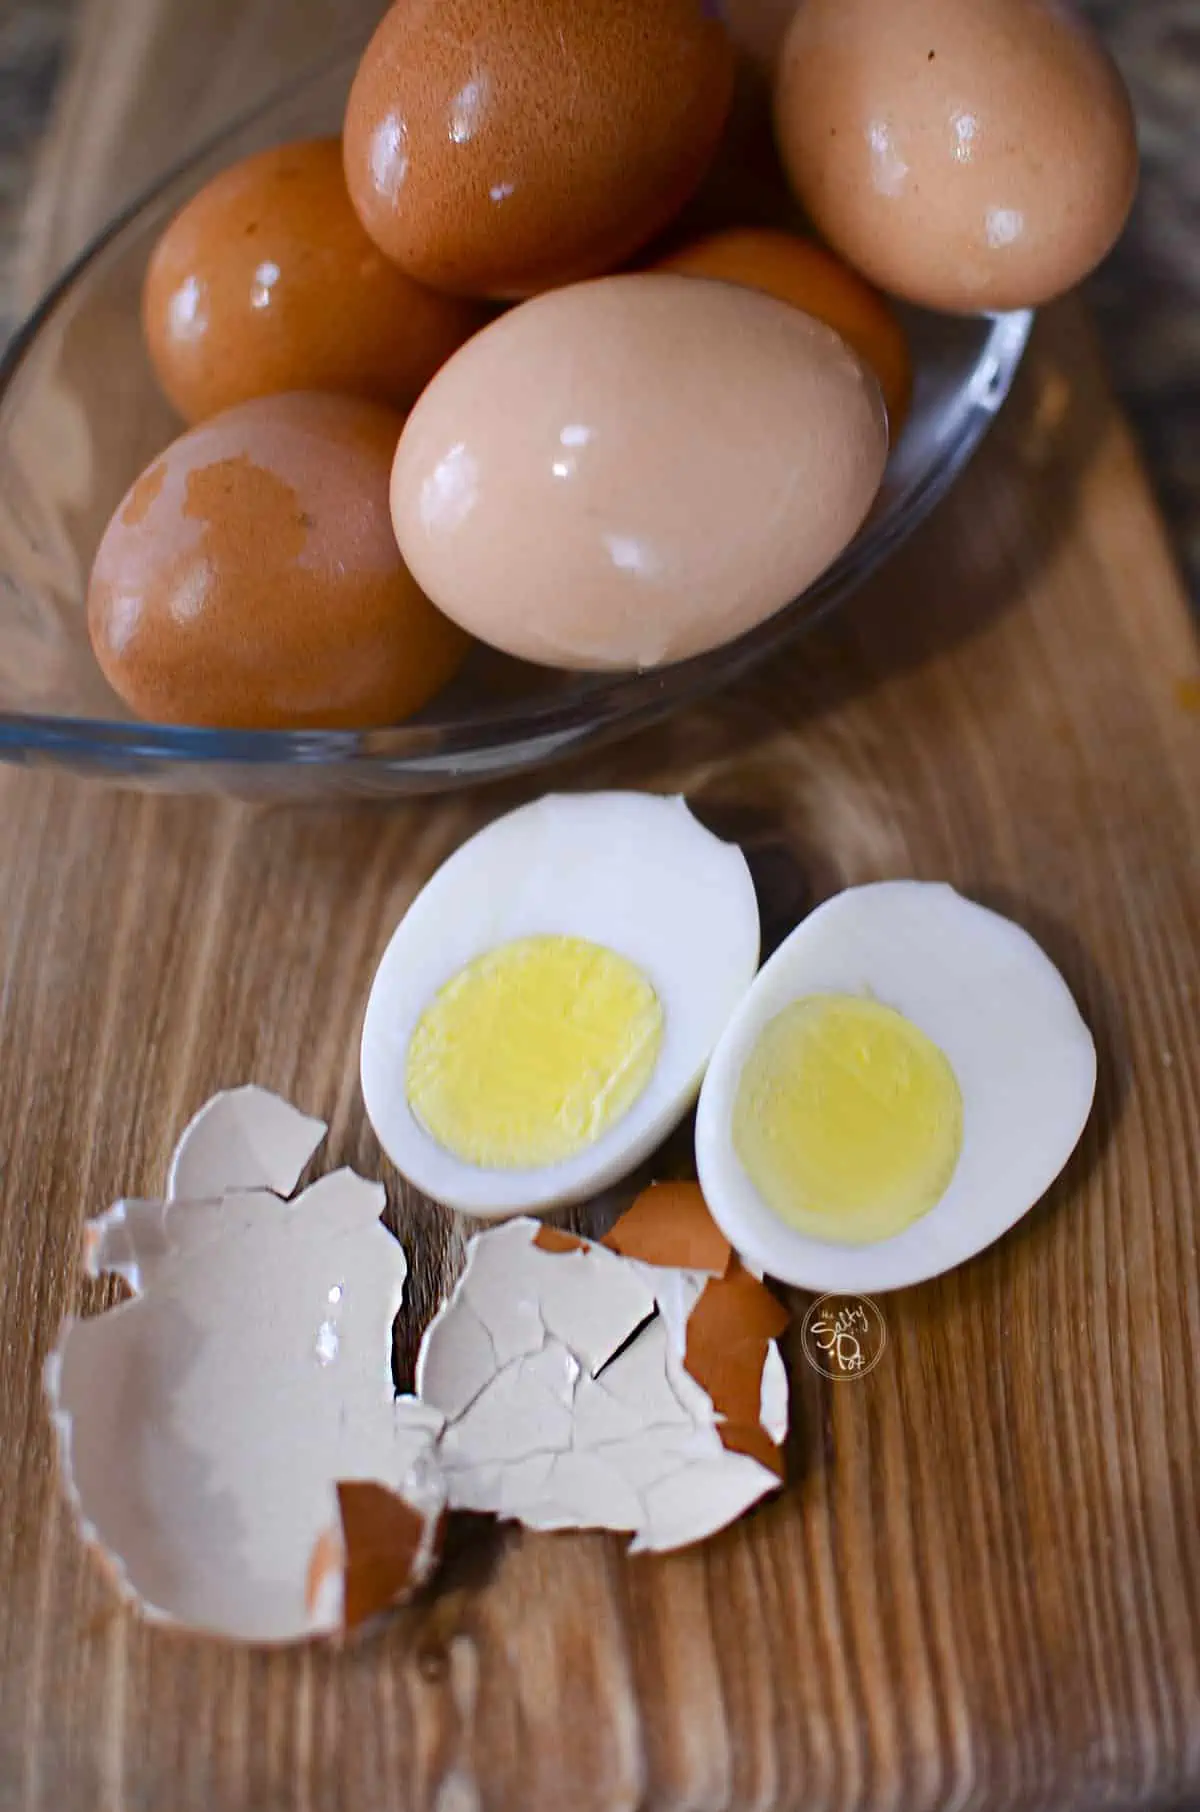 Hard boiled eggs in a glass boil at the top with one cooked egg split open and the shell on the left of it.